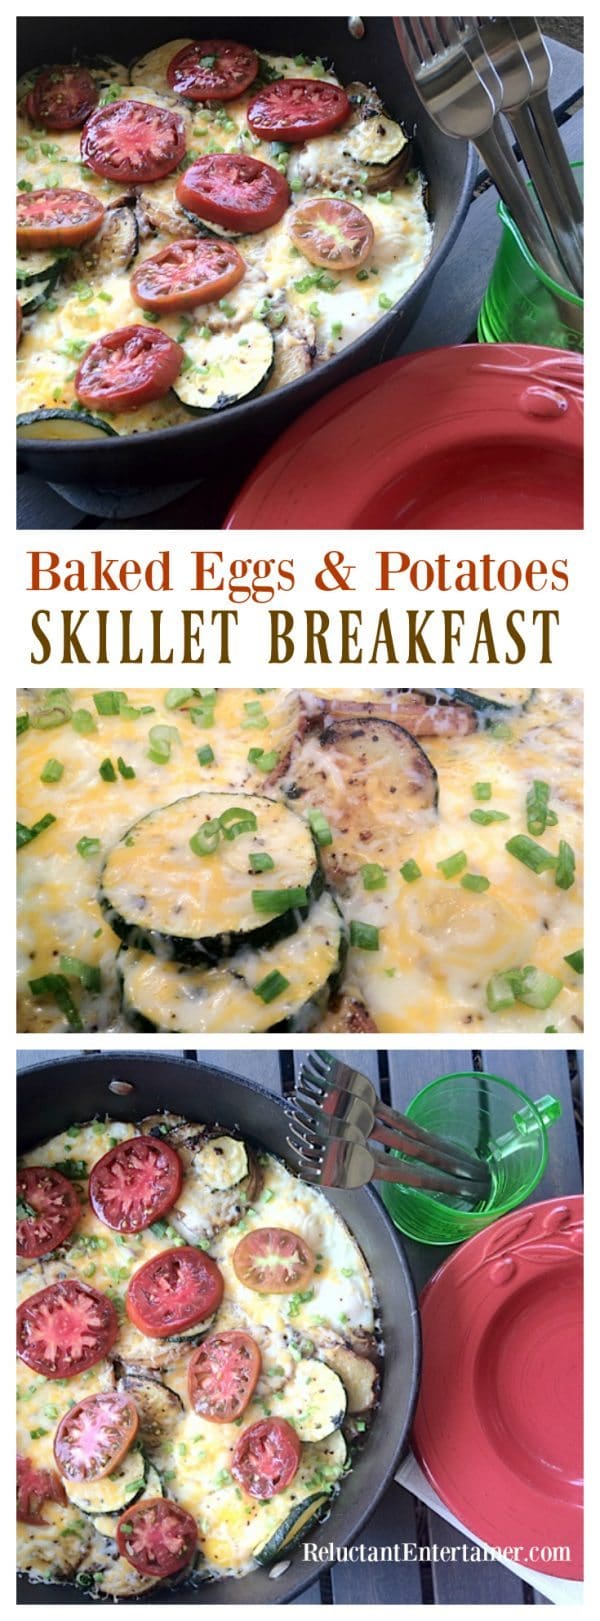 Day 18. Bounty. Baked Eggs and Potatoes Skillet Breakfast.